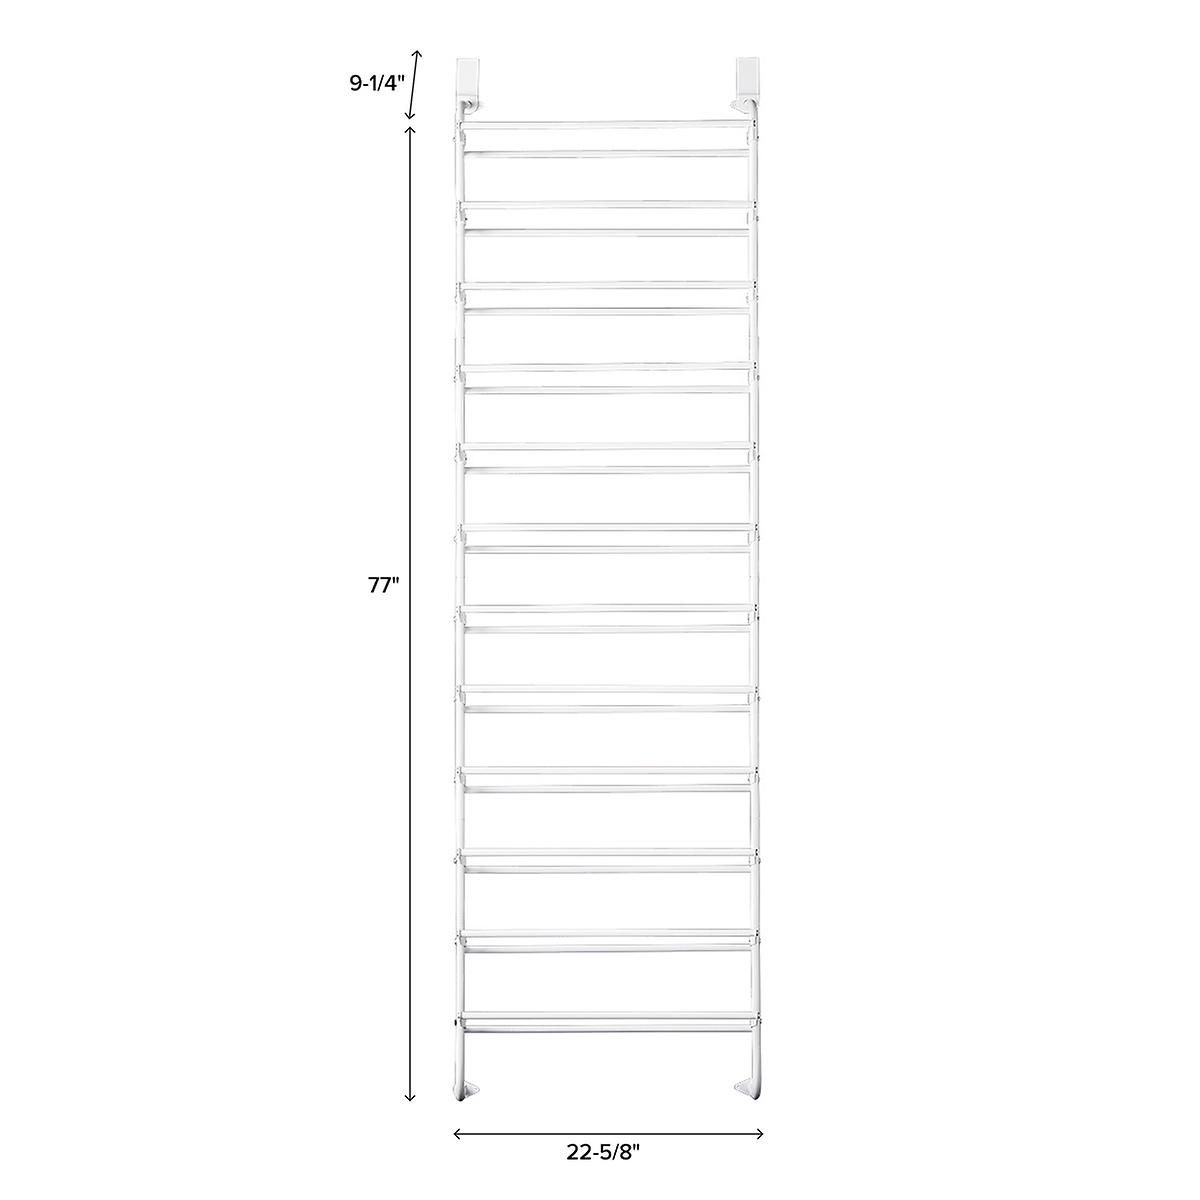 White 12-Tier Over the Door Shoe Rack | The Container Store